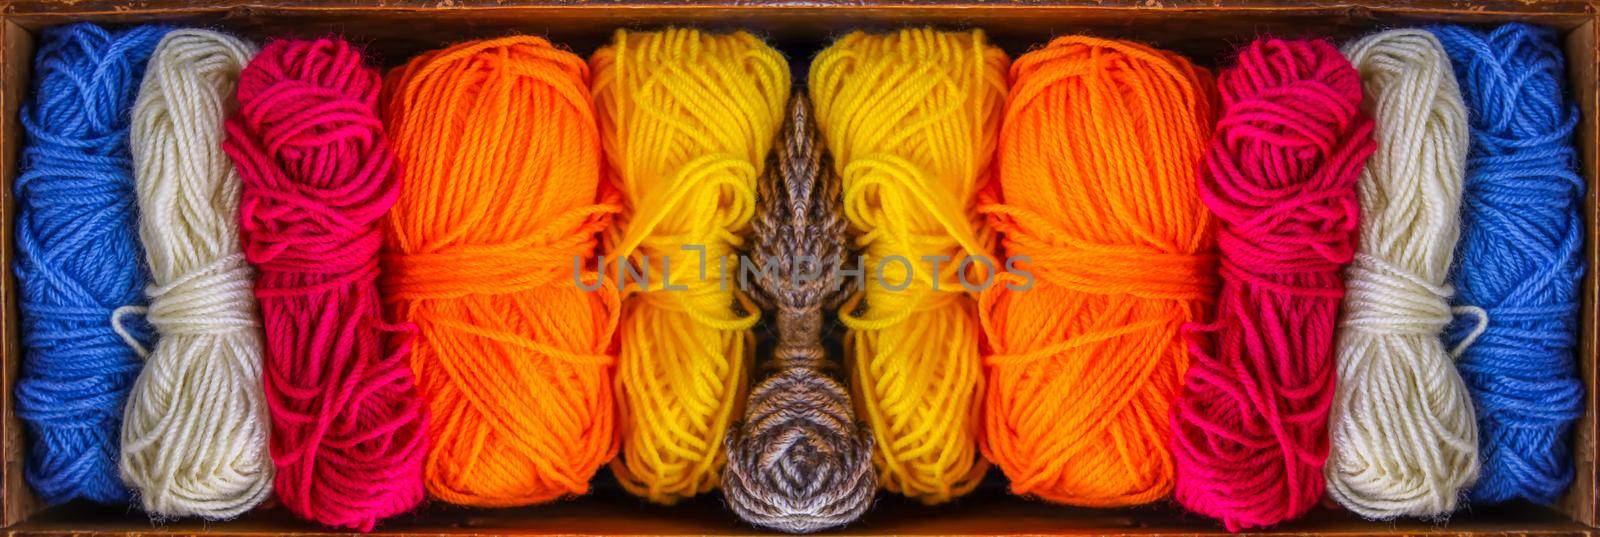 Colorful skeins of yarn in old wooden vintage box close up. by nightlyviolet